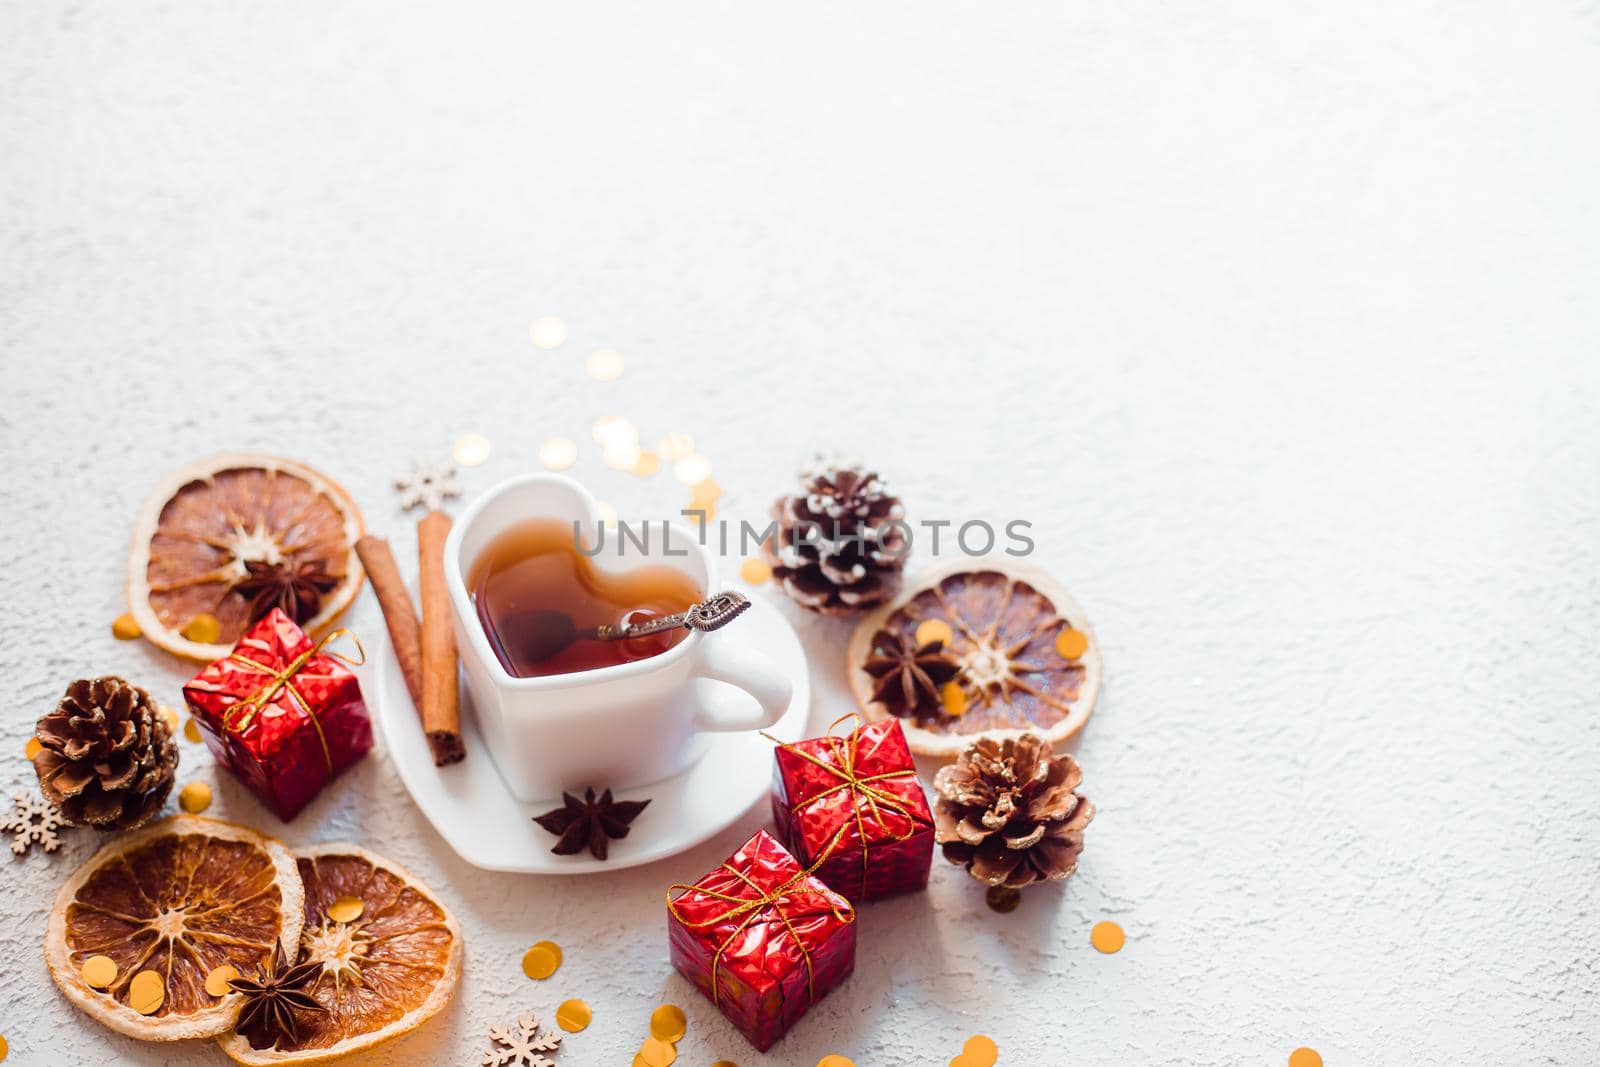 New Year 's tea on a white background . Glitter and white background. Holiday. Holiday decorations. Hot tea . The layout is a festive tea party. Christmas